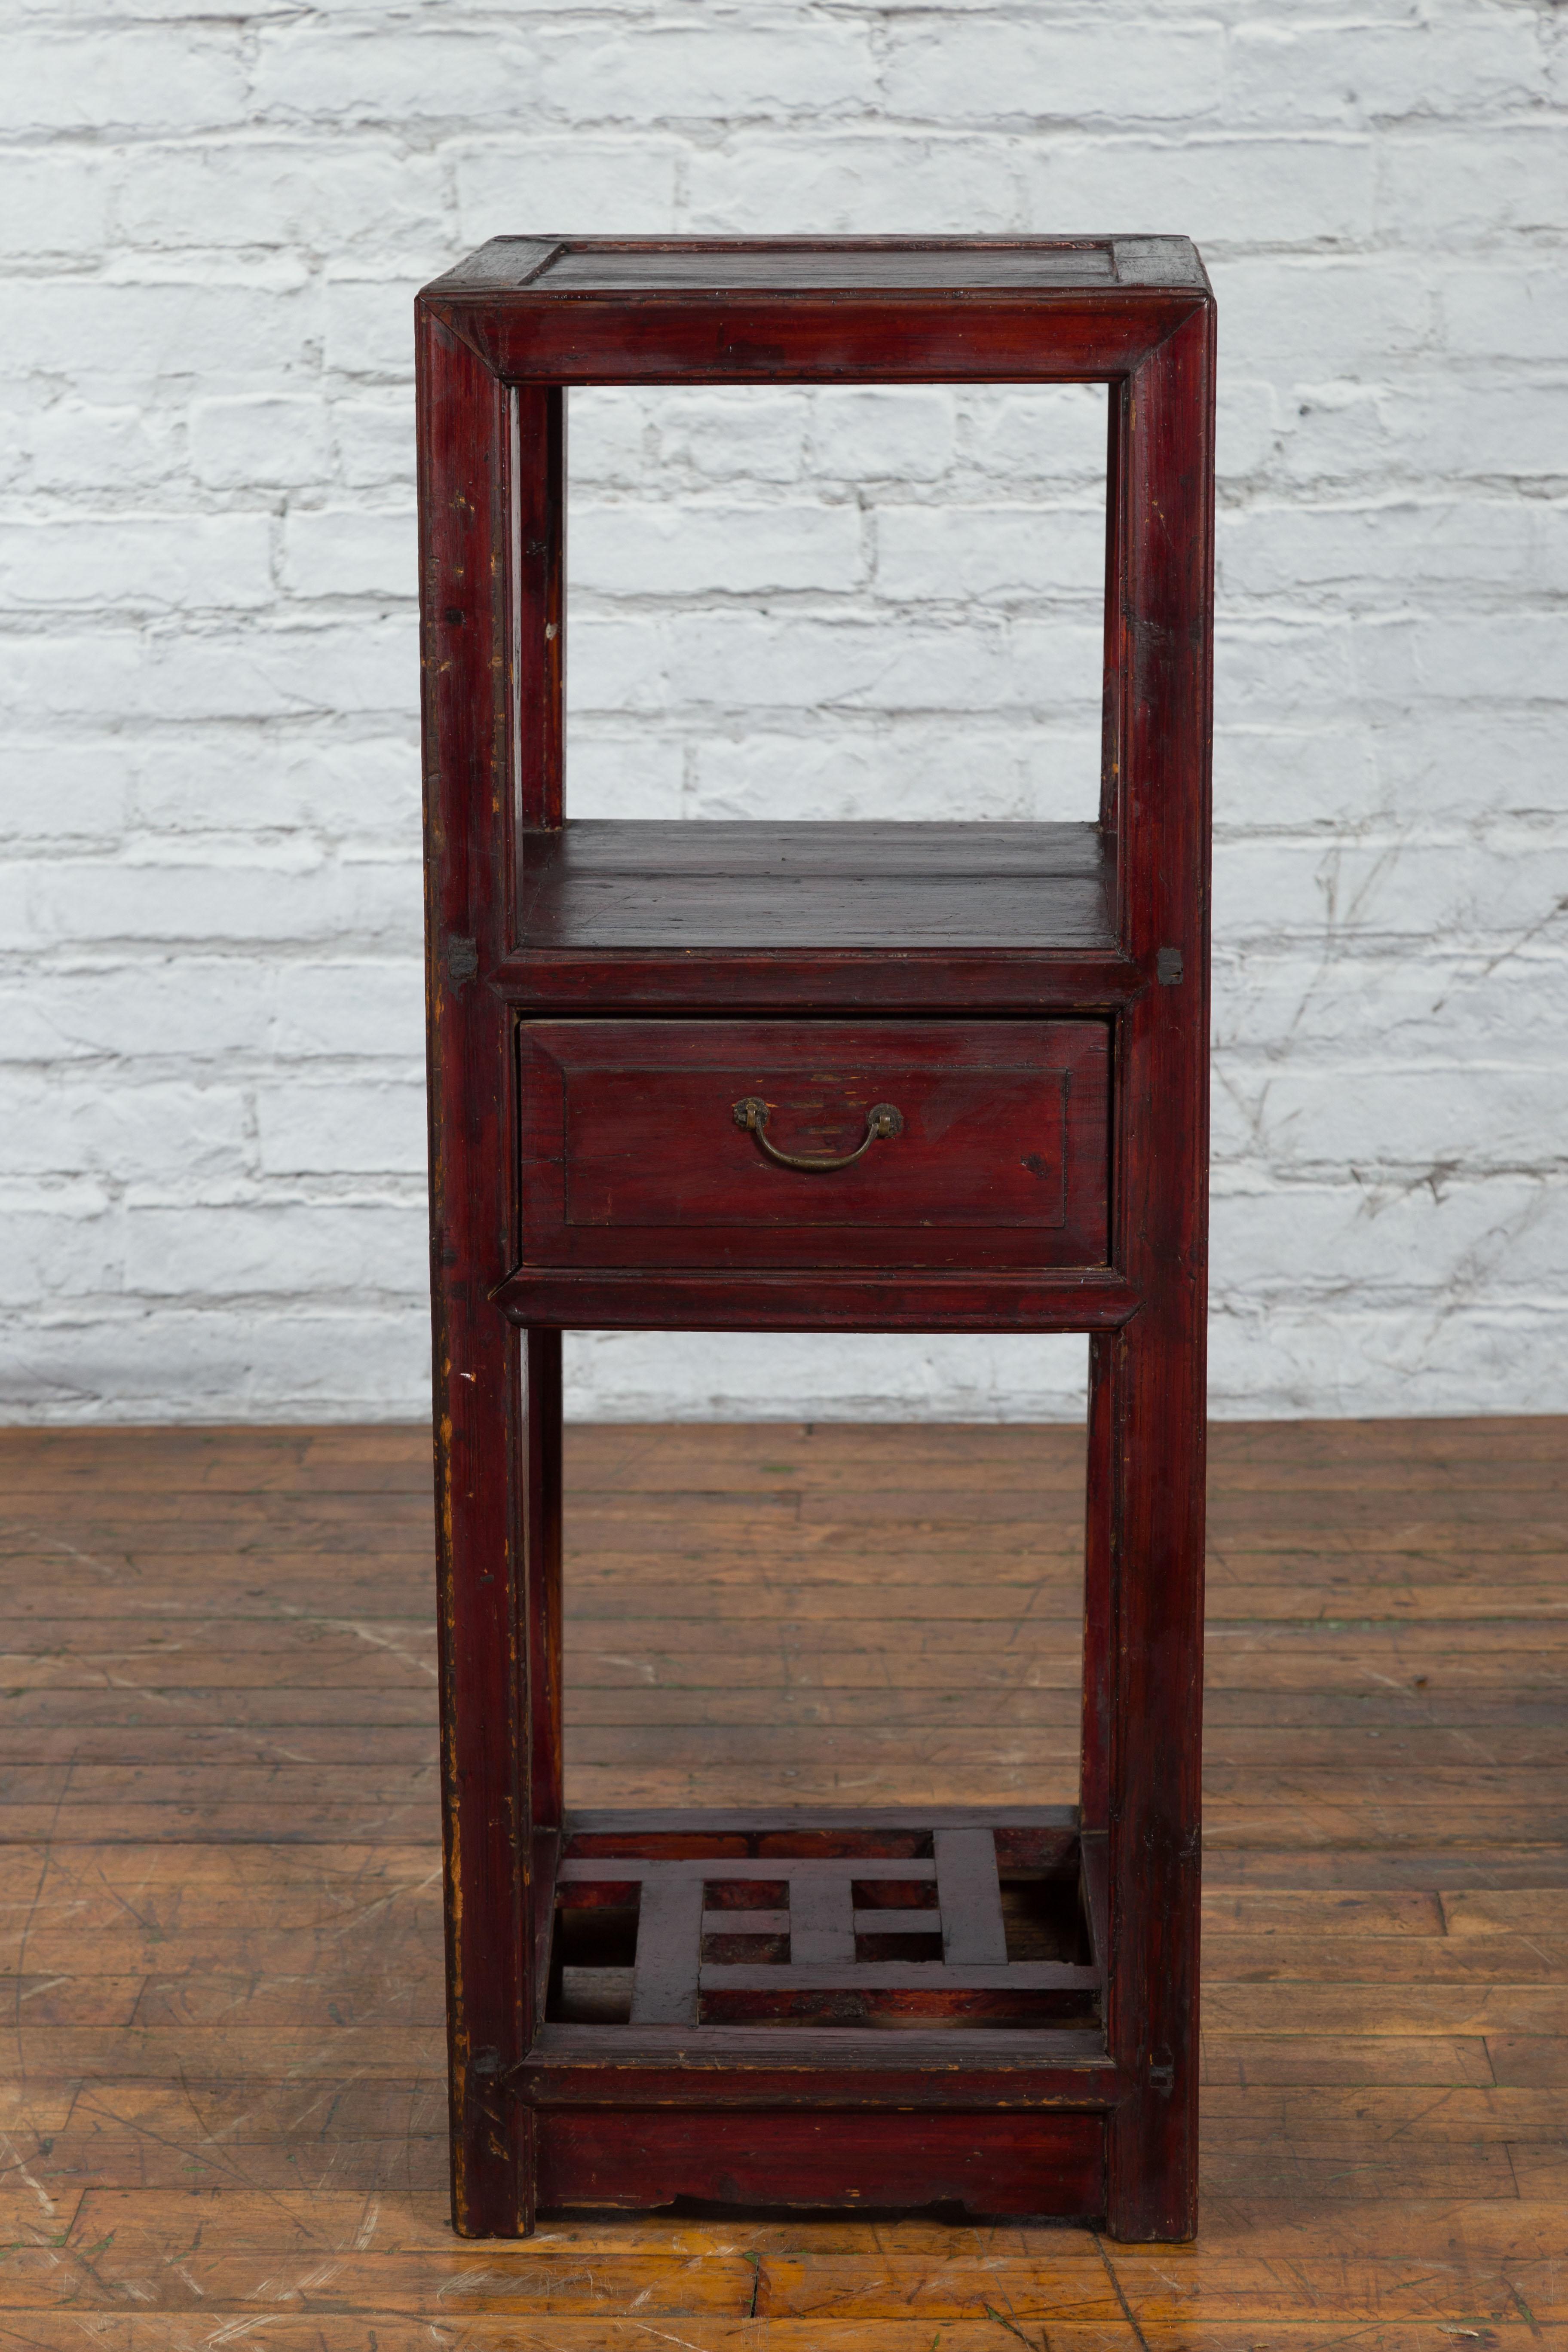 Chinese Late Qing Dynasty 1900s Tiered Table with Drawer and Fretwork Shelf In Good Condition For Sale In Yonkers, NY